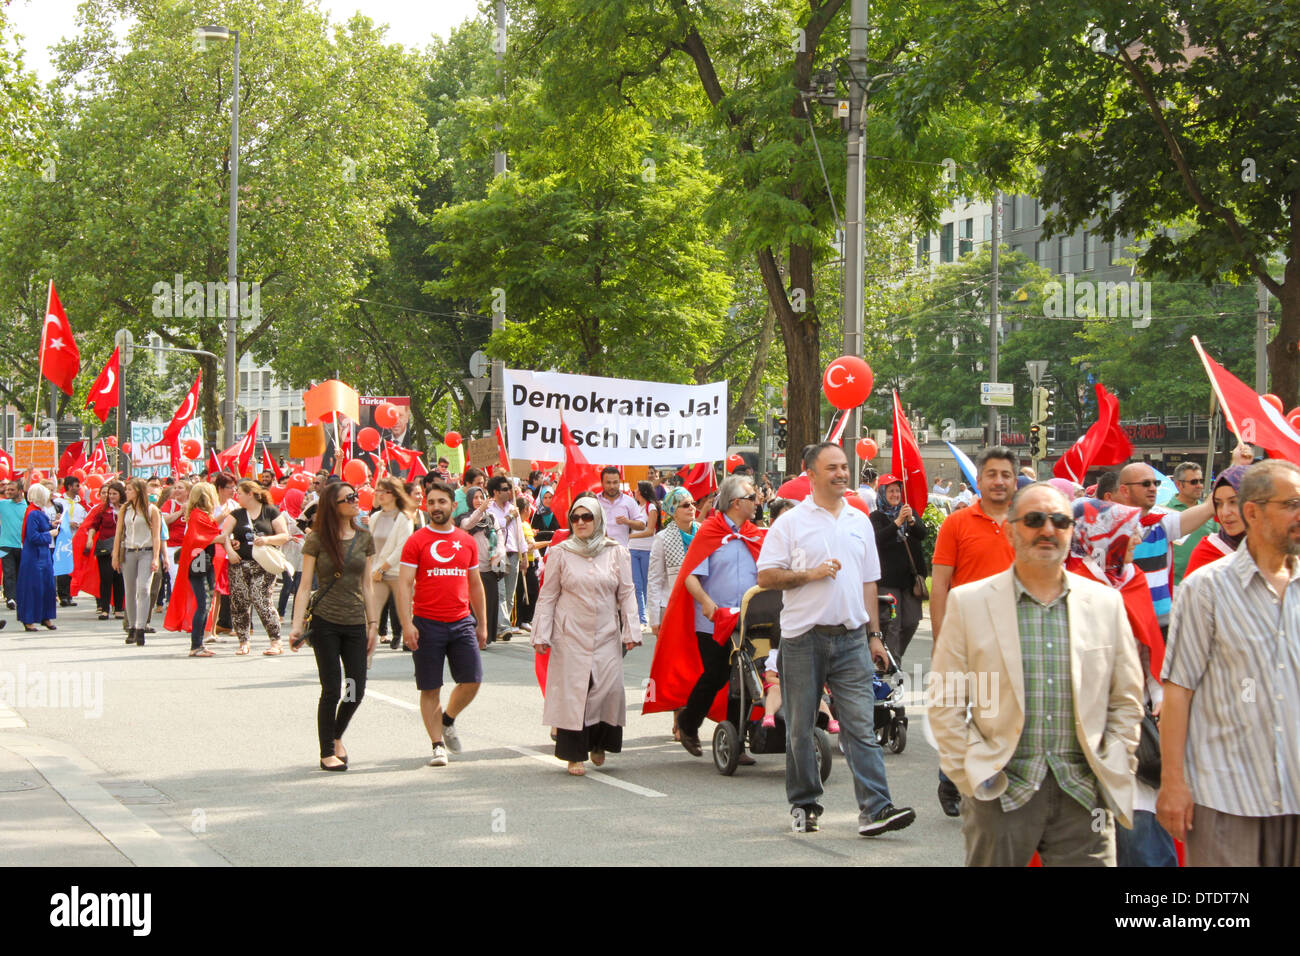 MUNICH, GERMANY - JULY 6, 2013: People of turkish origin came out to support Prime Minister of Turkey Recep Tayyip Erdogan. Stock Photo